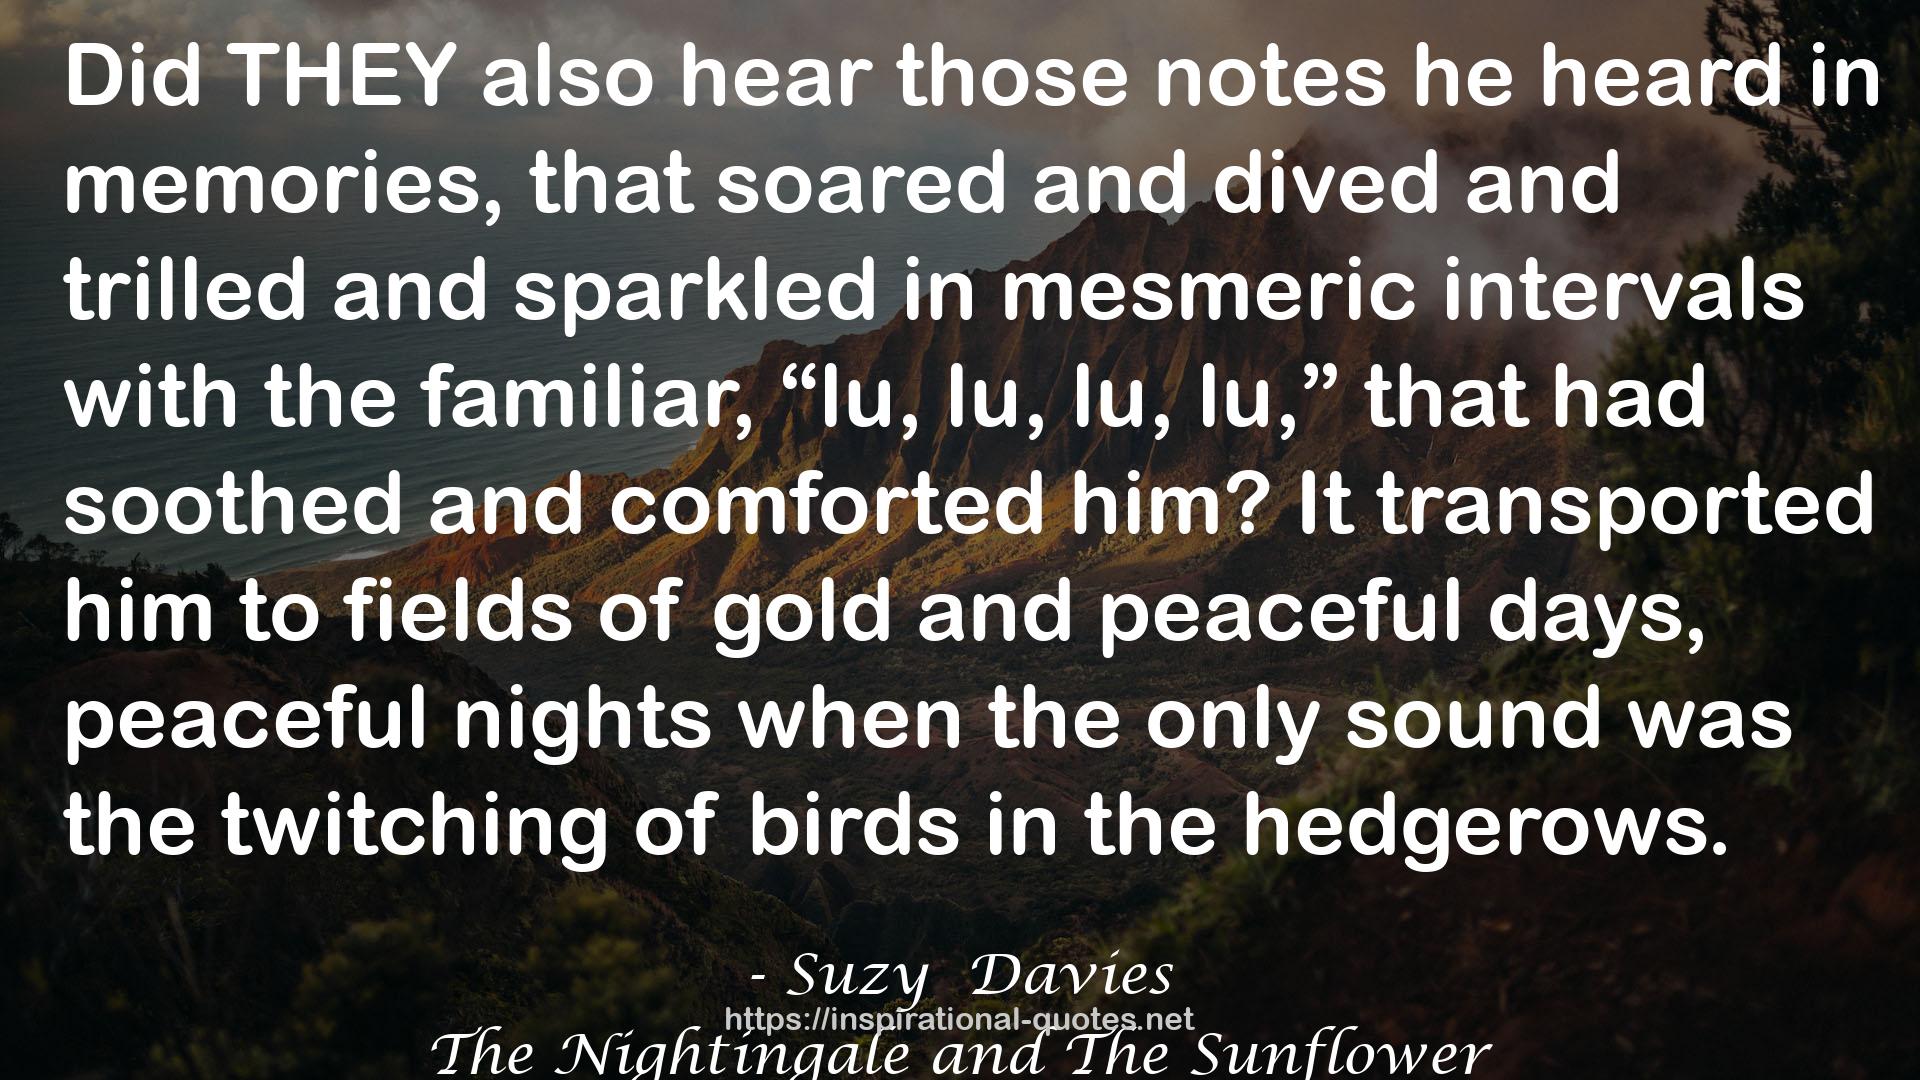 The Nightingale and The Sunflower QUOTES